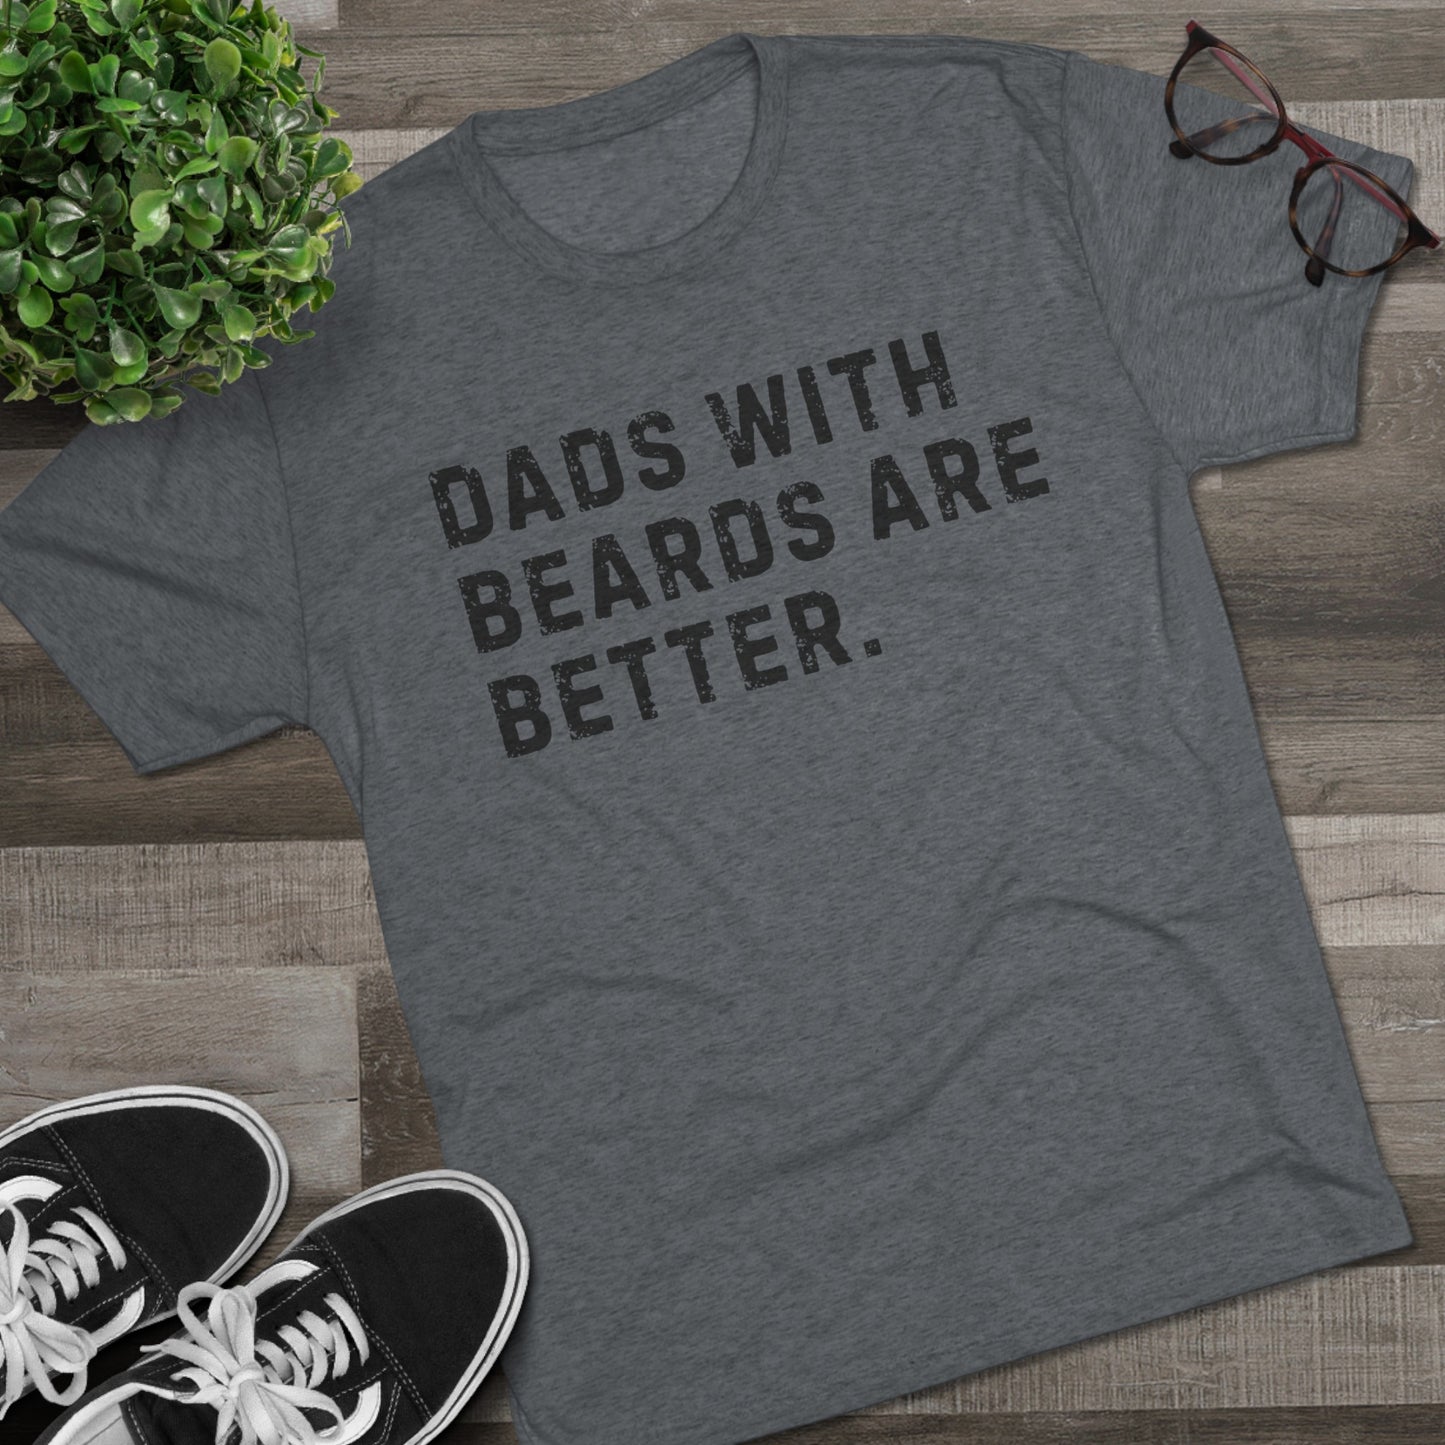 Dads with Beards Are Better T-Shirt - Ultra-Soft Tri-Blend, Regular Fit for Superior Comfort